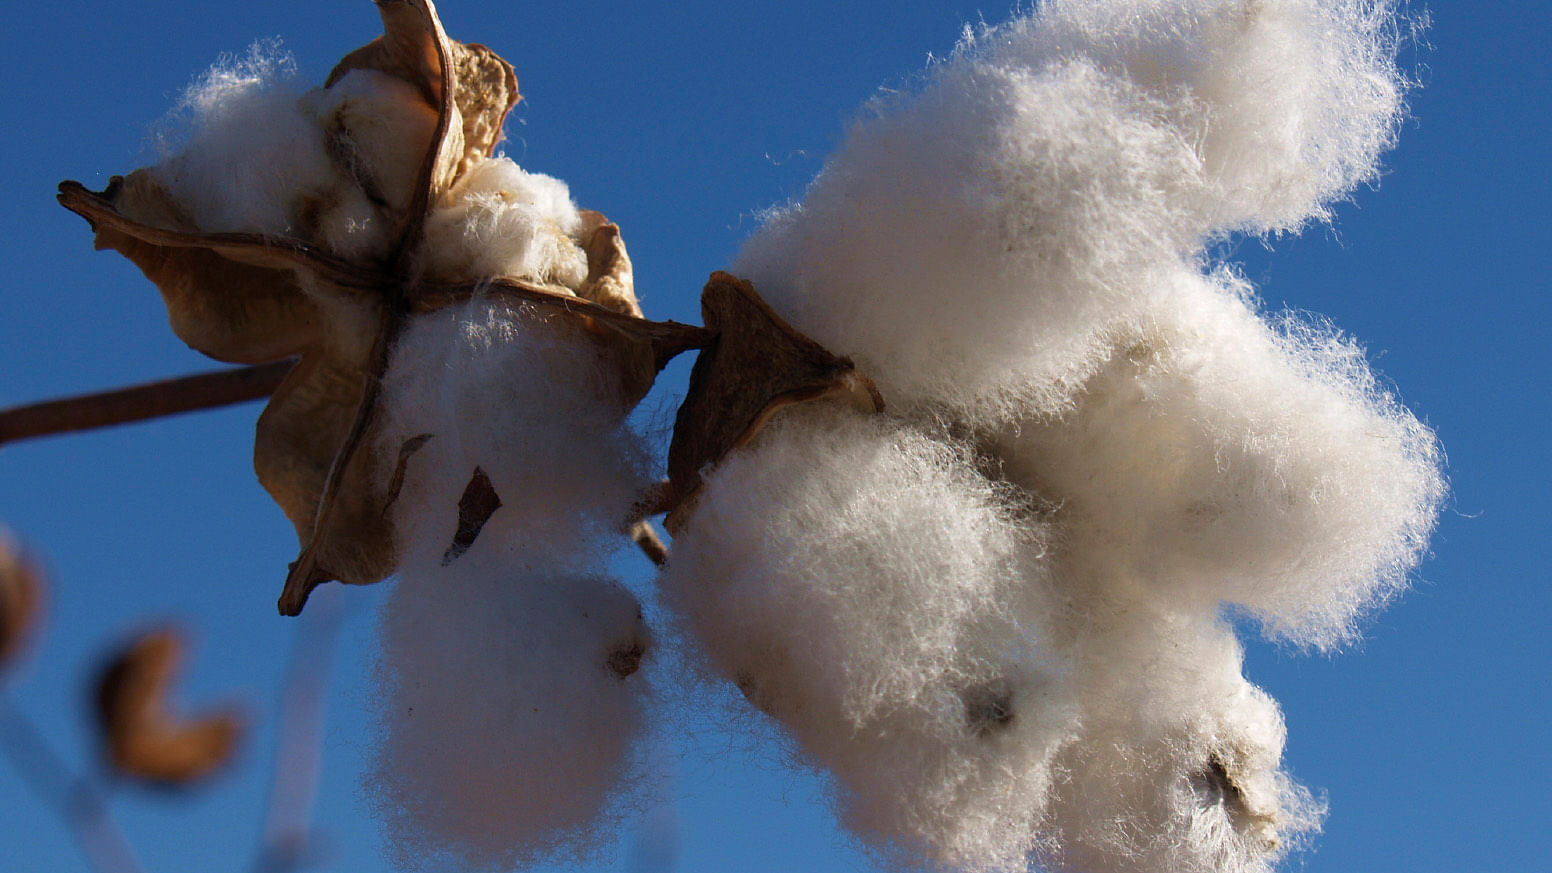  Mahyco-Monsanto Biotech (MMB) has issued notices to terminate the Bt cottonseed licenses of Nuziveedu Seeds Limited (NSL), and its subsidiaries – Pravardhan Seeds and Prabhat Agri Biotech – over non-payment of trait fees. (Photo: iStockphoto)